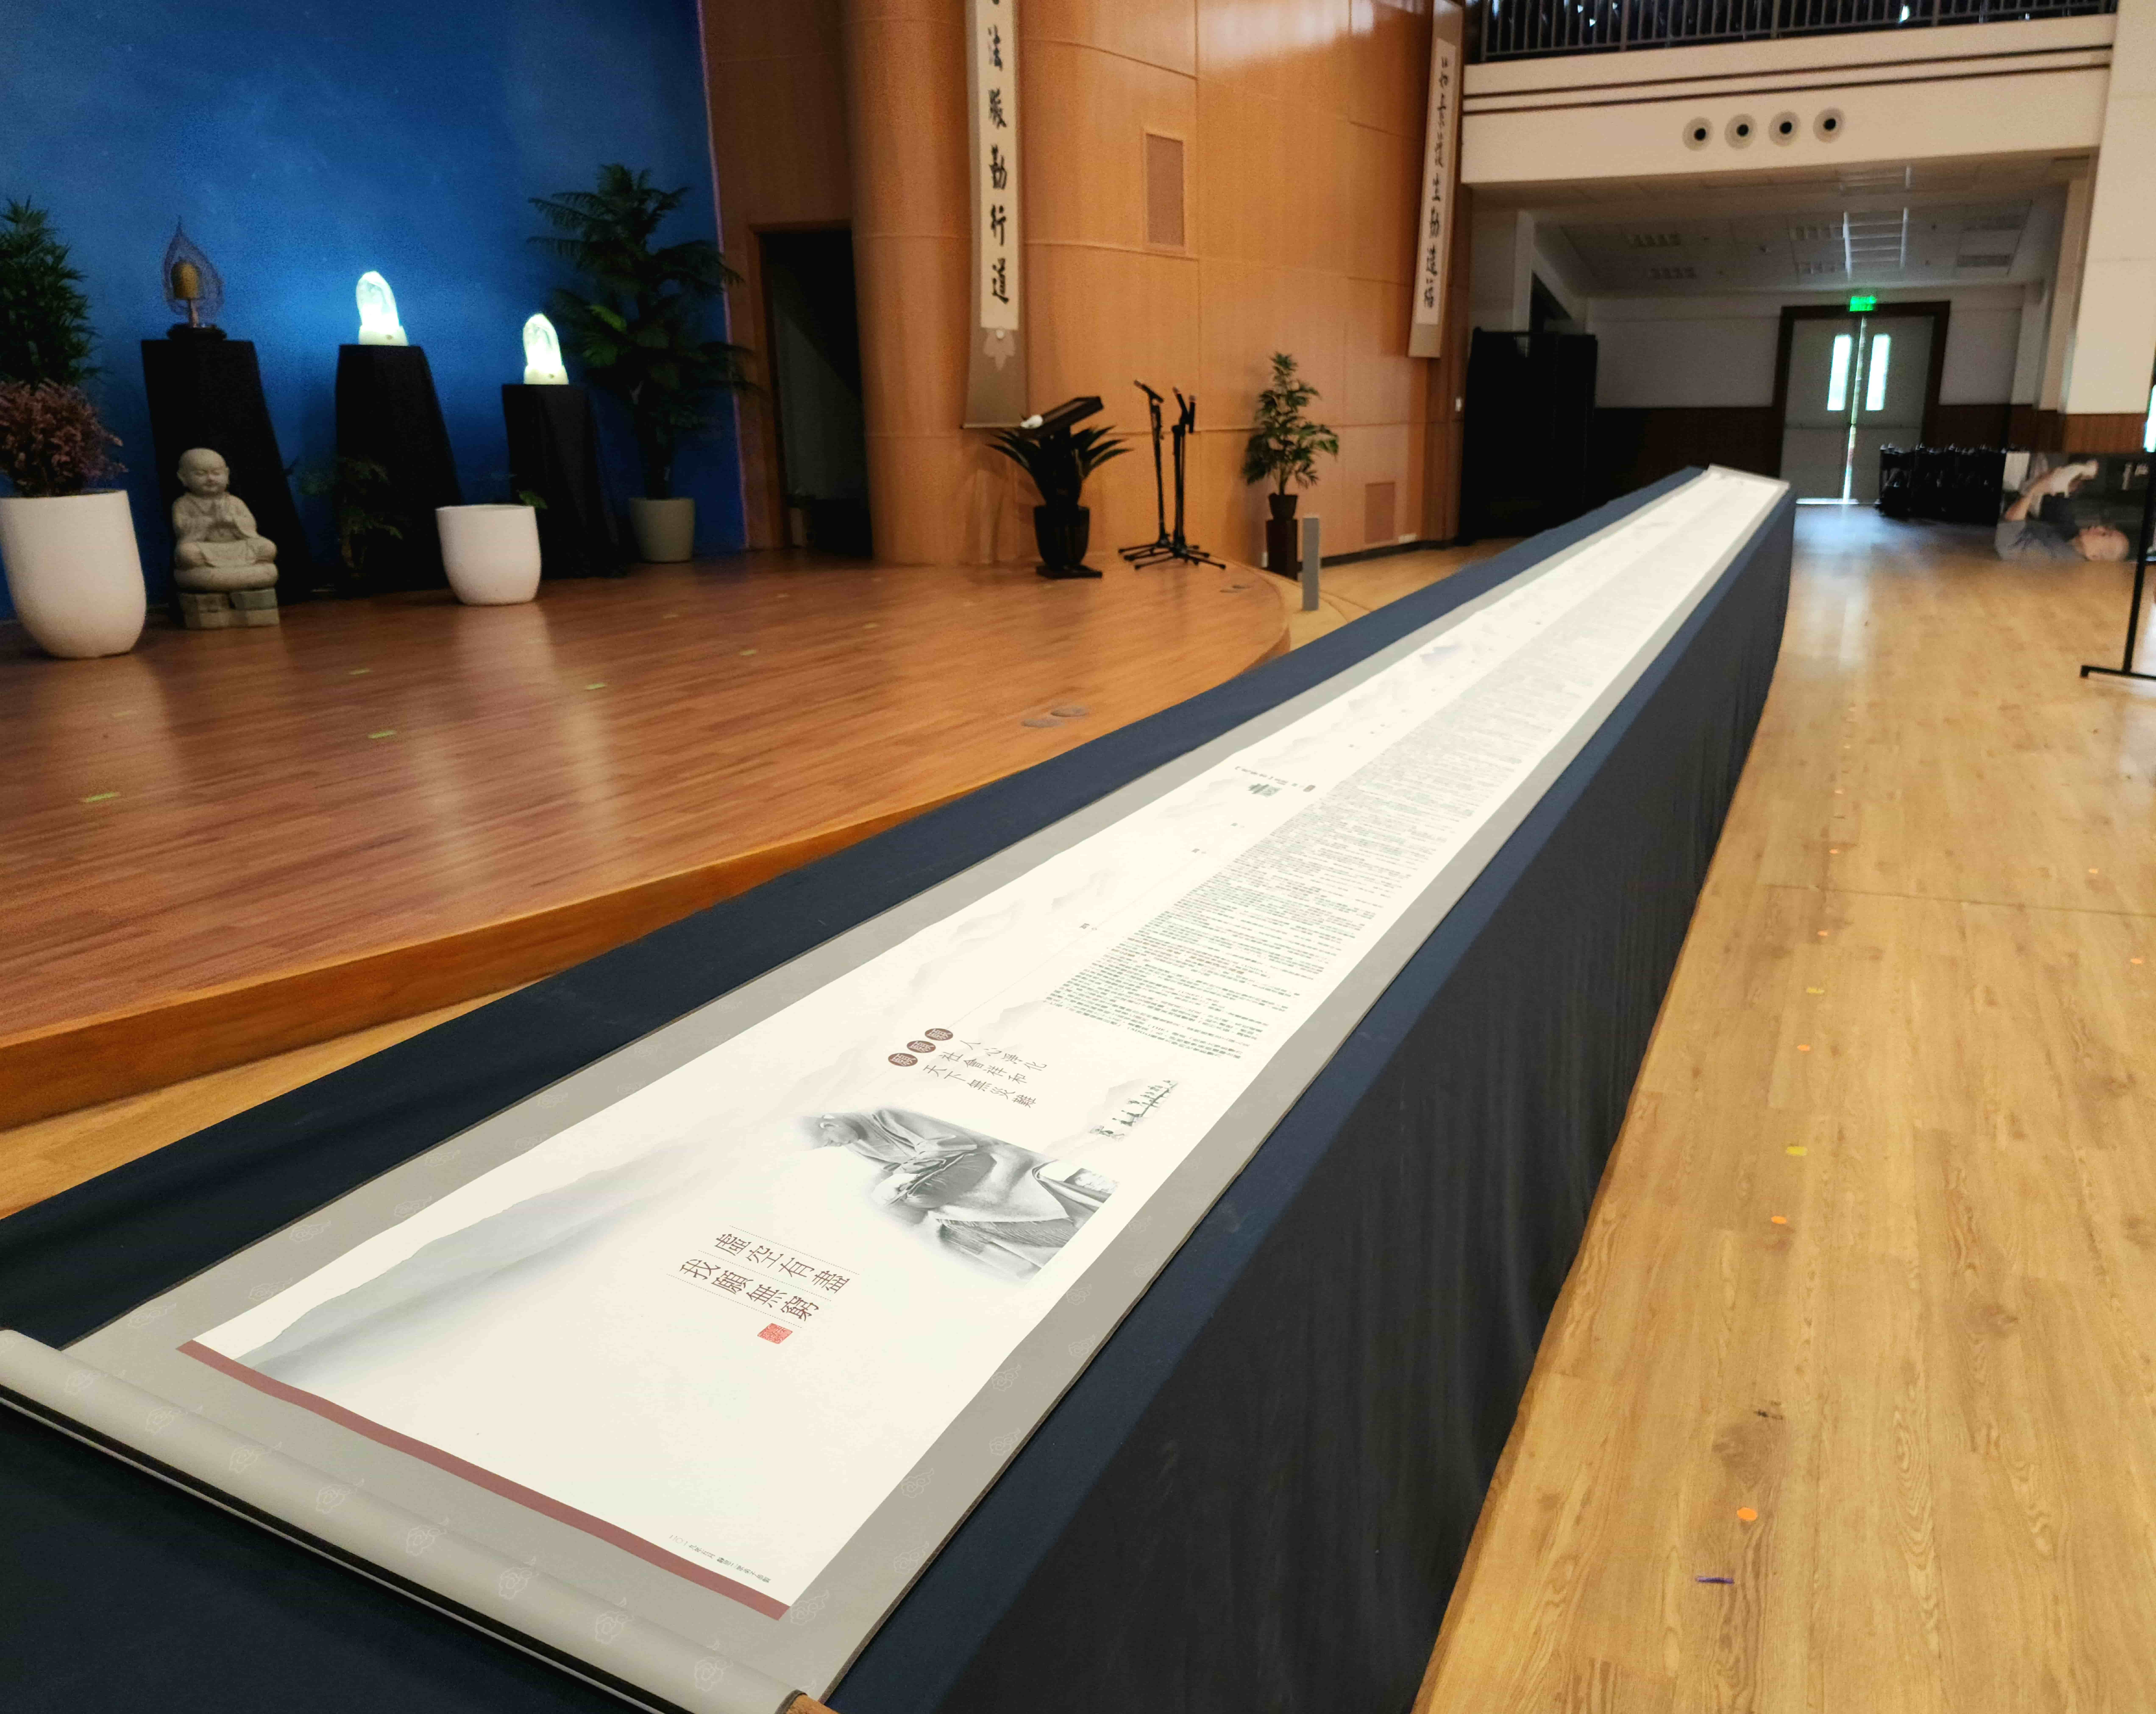 The 10 meter long scroll chronicling Tzu Chi events from 1966 to 2019.